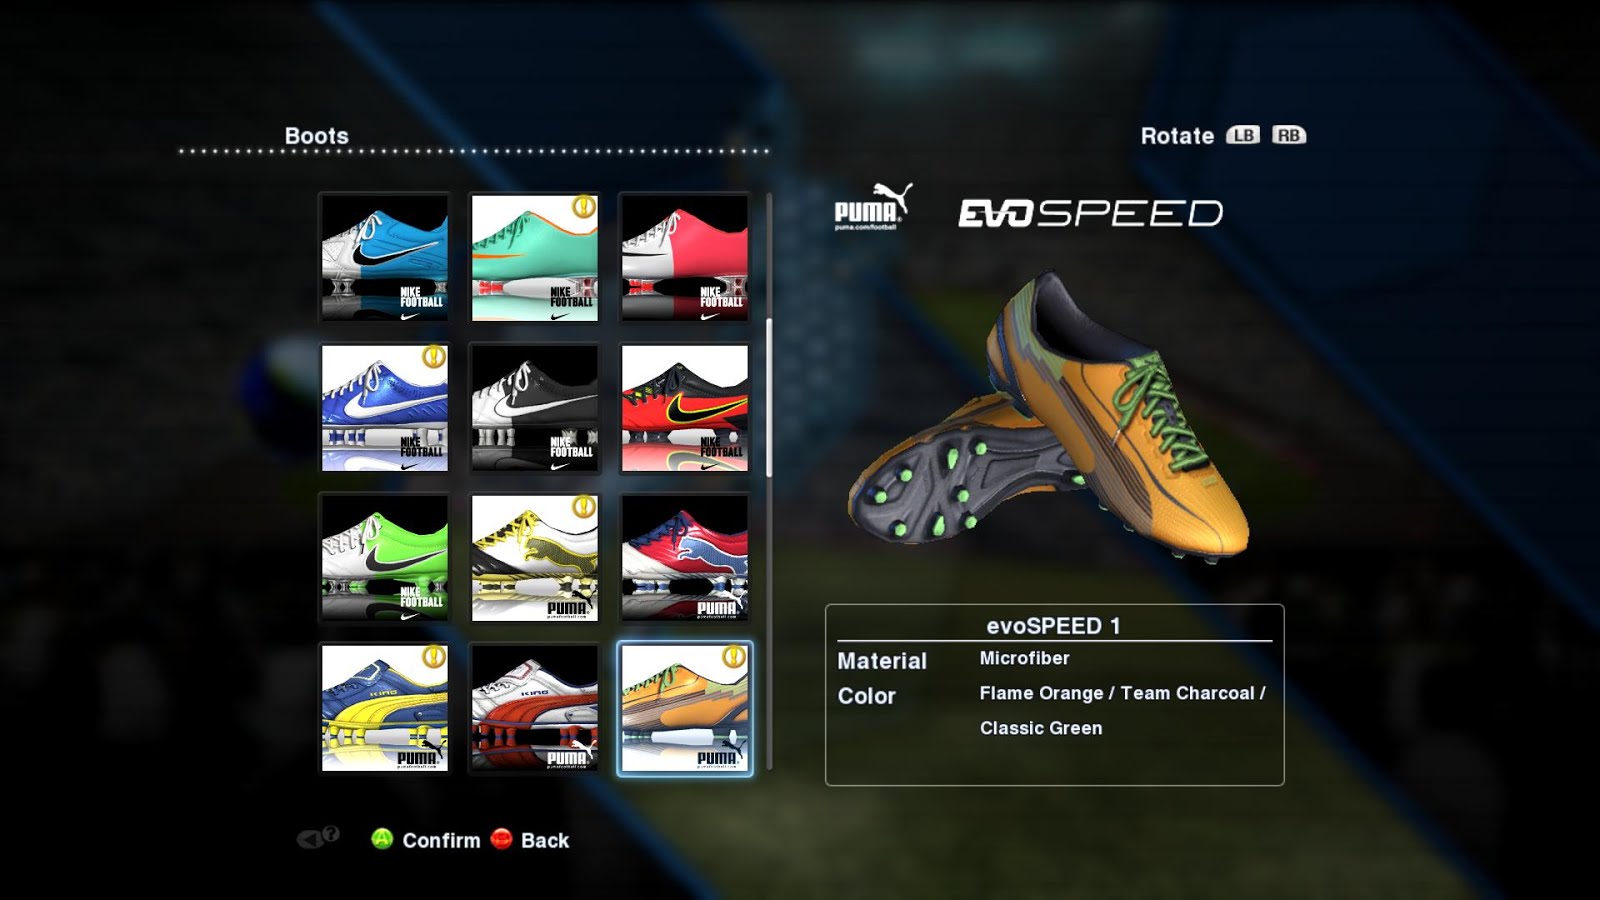 Download game pes 2013 highly compressed cso